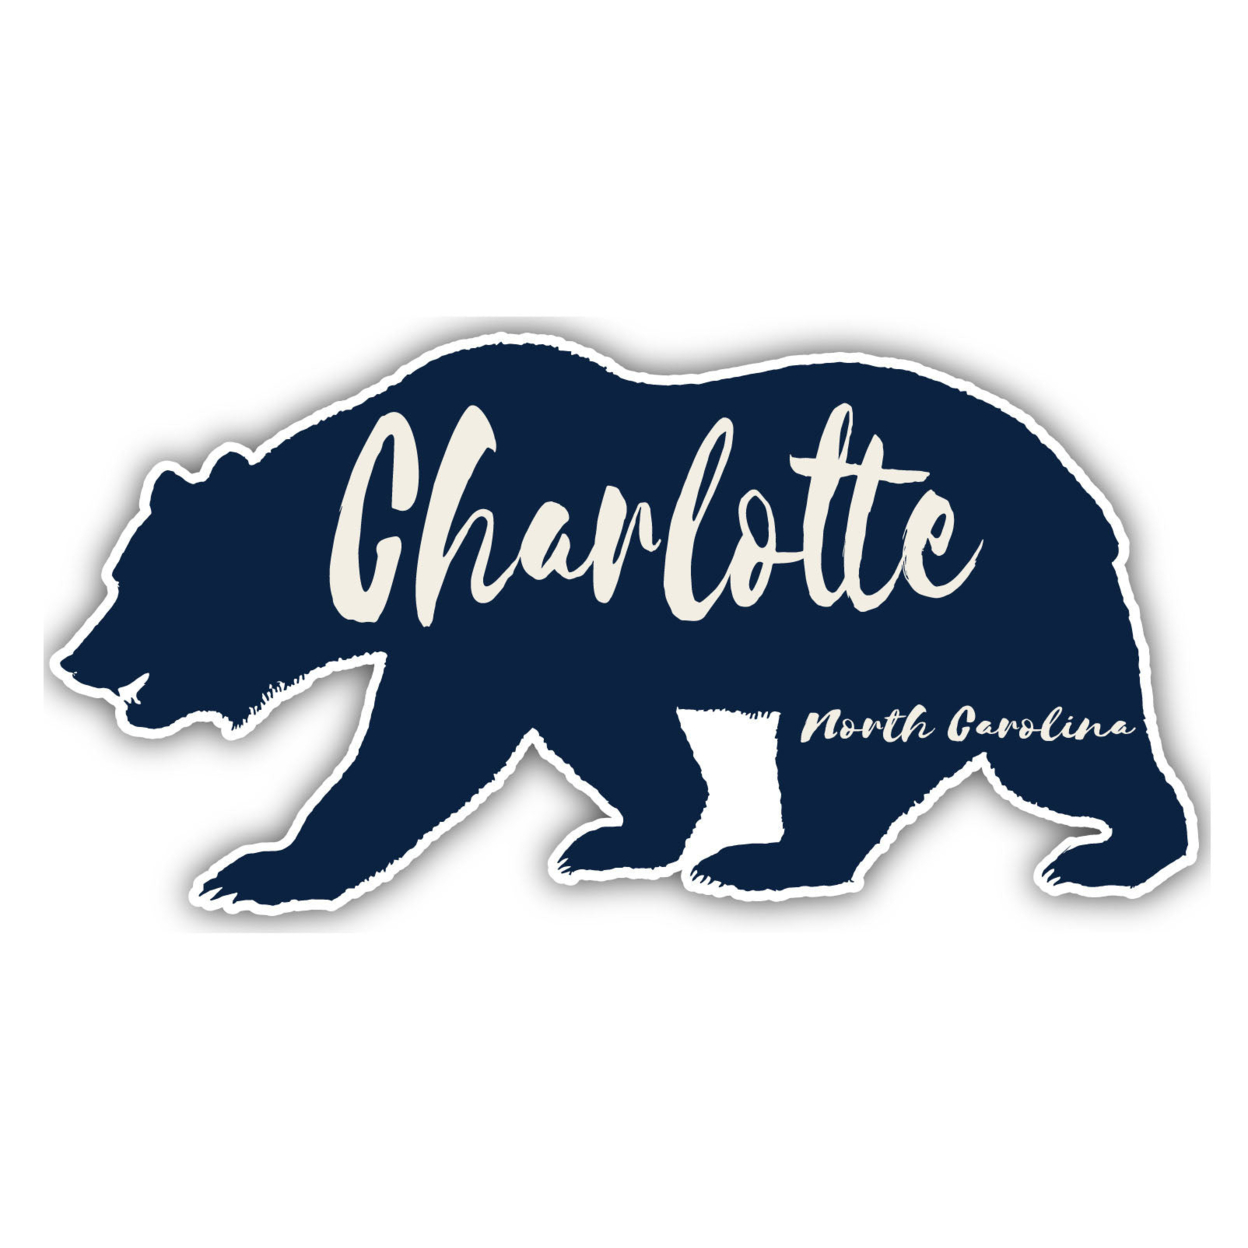 Charlotte North Carolina Souvenir Decorative Stickers (Choose Theme And Size) - 4-Pack, 2-Inch, Great Outdoors